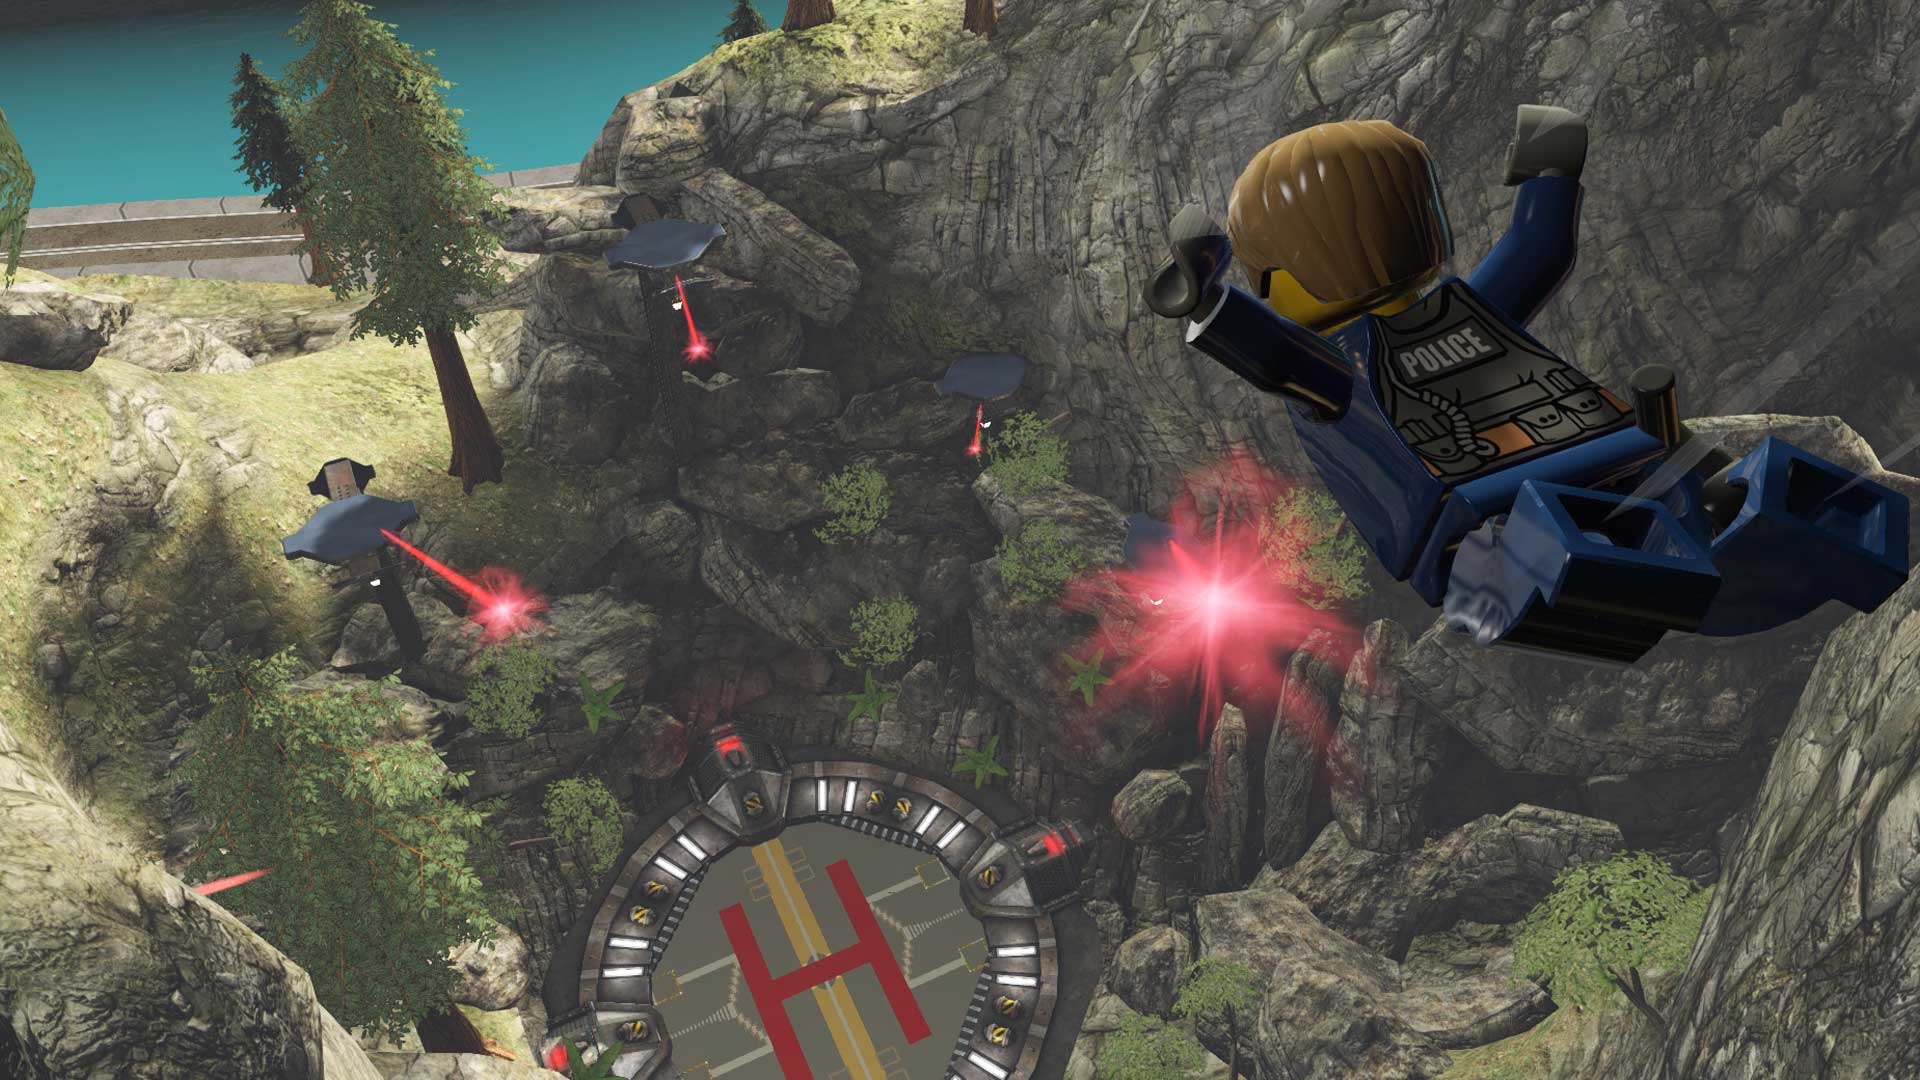 REVIEW : LEGO® CITY Undercover (PS4/ PS4 Pro)